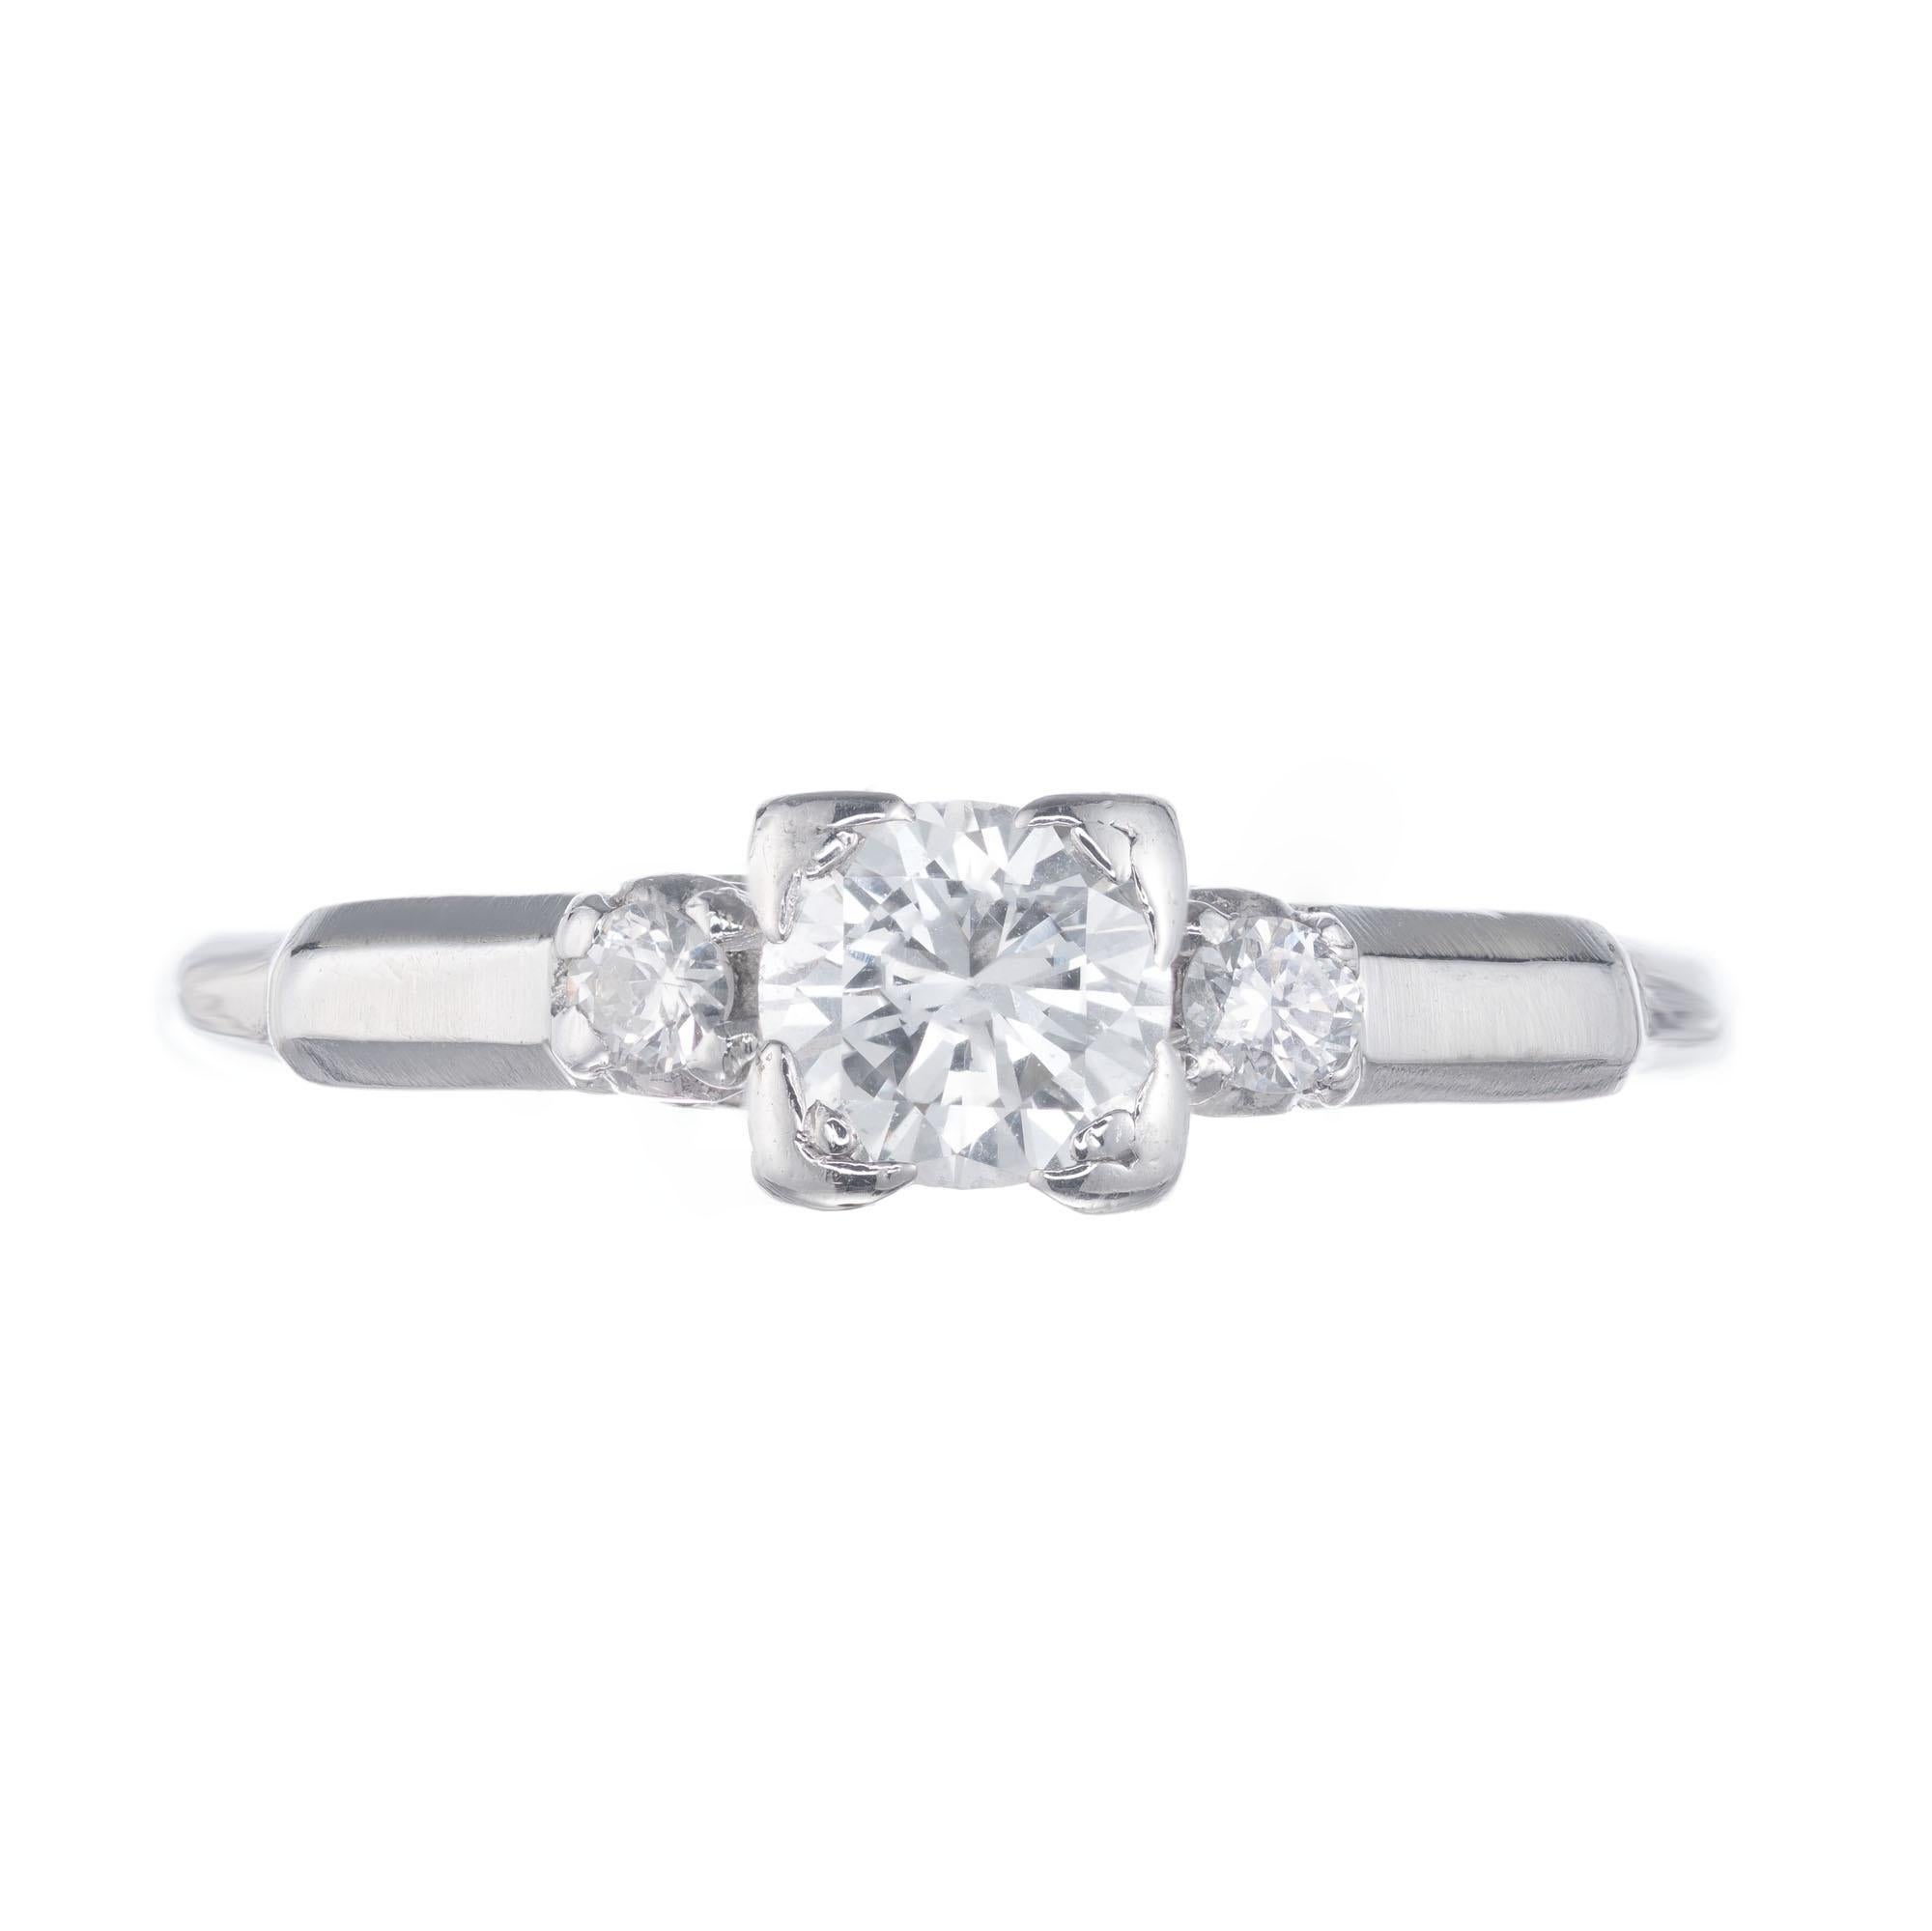 Art Deco 1940’s three-stone diamond engagement ring. Handmade platinum setting with a .35ct center diamond and two round accent diamonds. 

1 center diamond: approx. total weight .35cts, F, VS
2 Side diamonds: approx. total weight .08cts, F, VS
Size